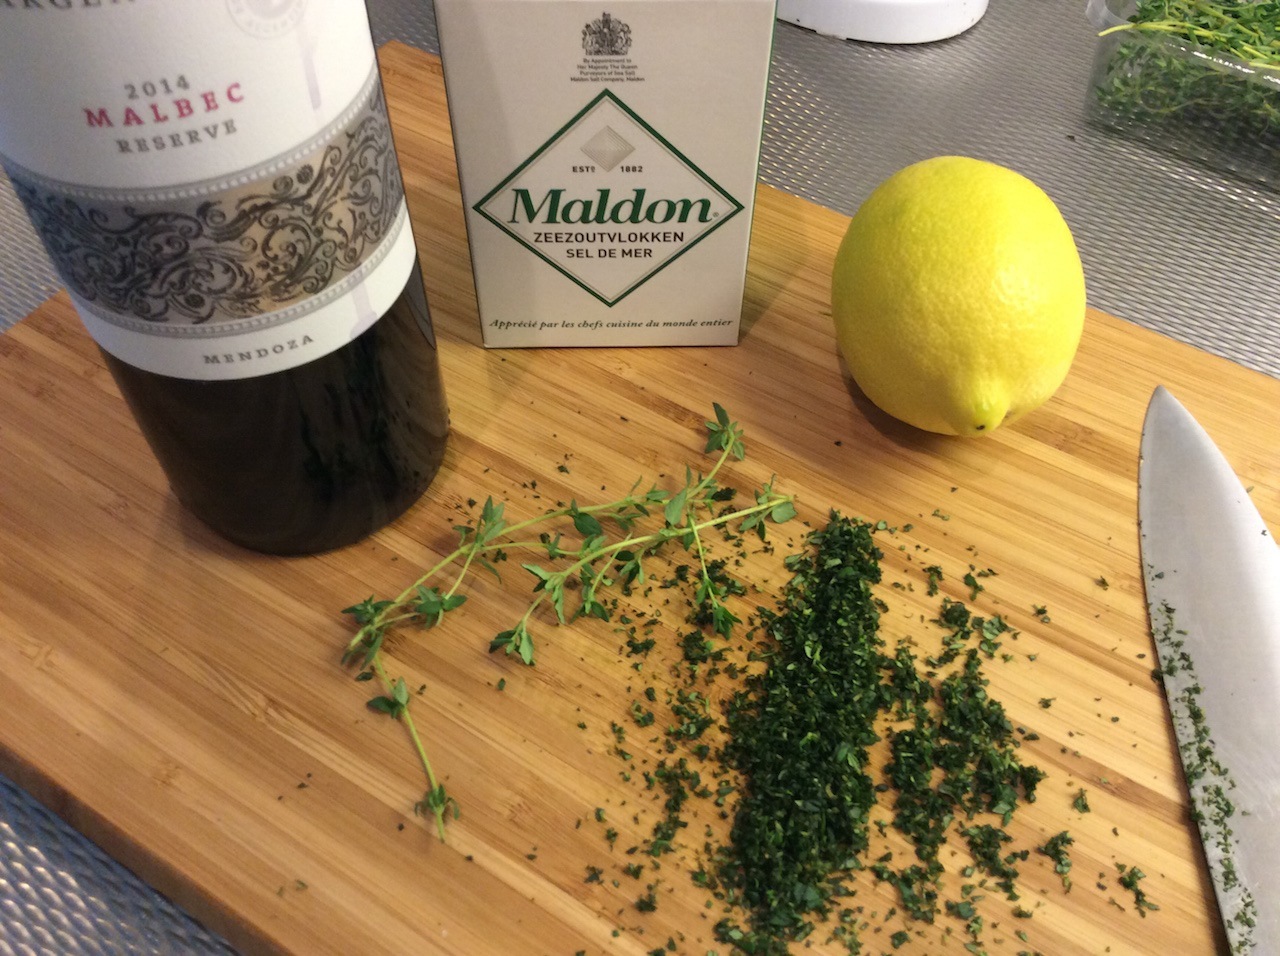 The basic ingredients are wine and salt. You can add herbs and zests if you want to add some extra flavor.